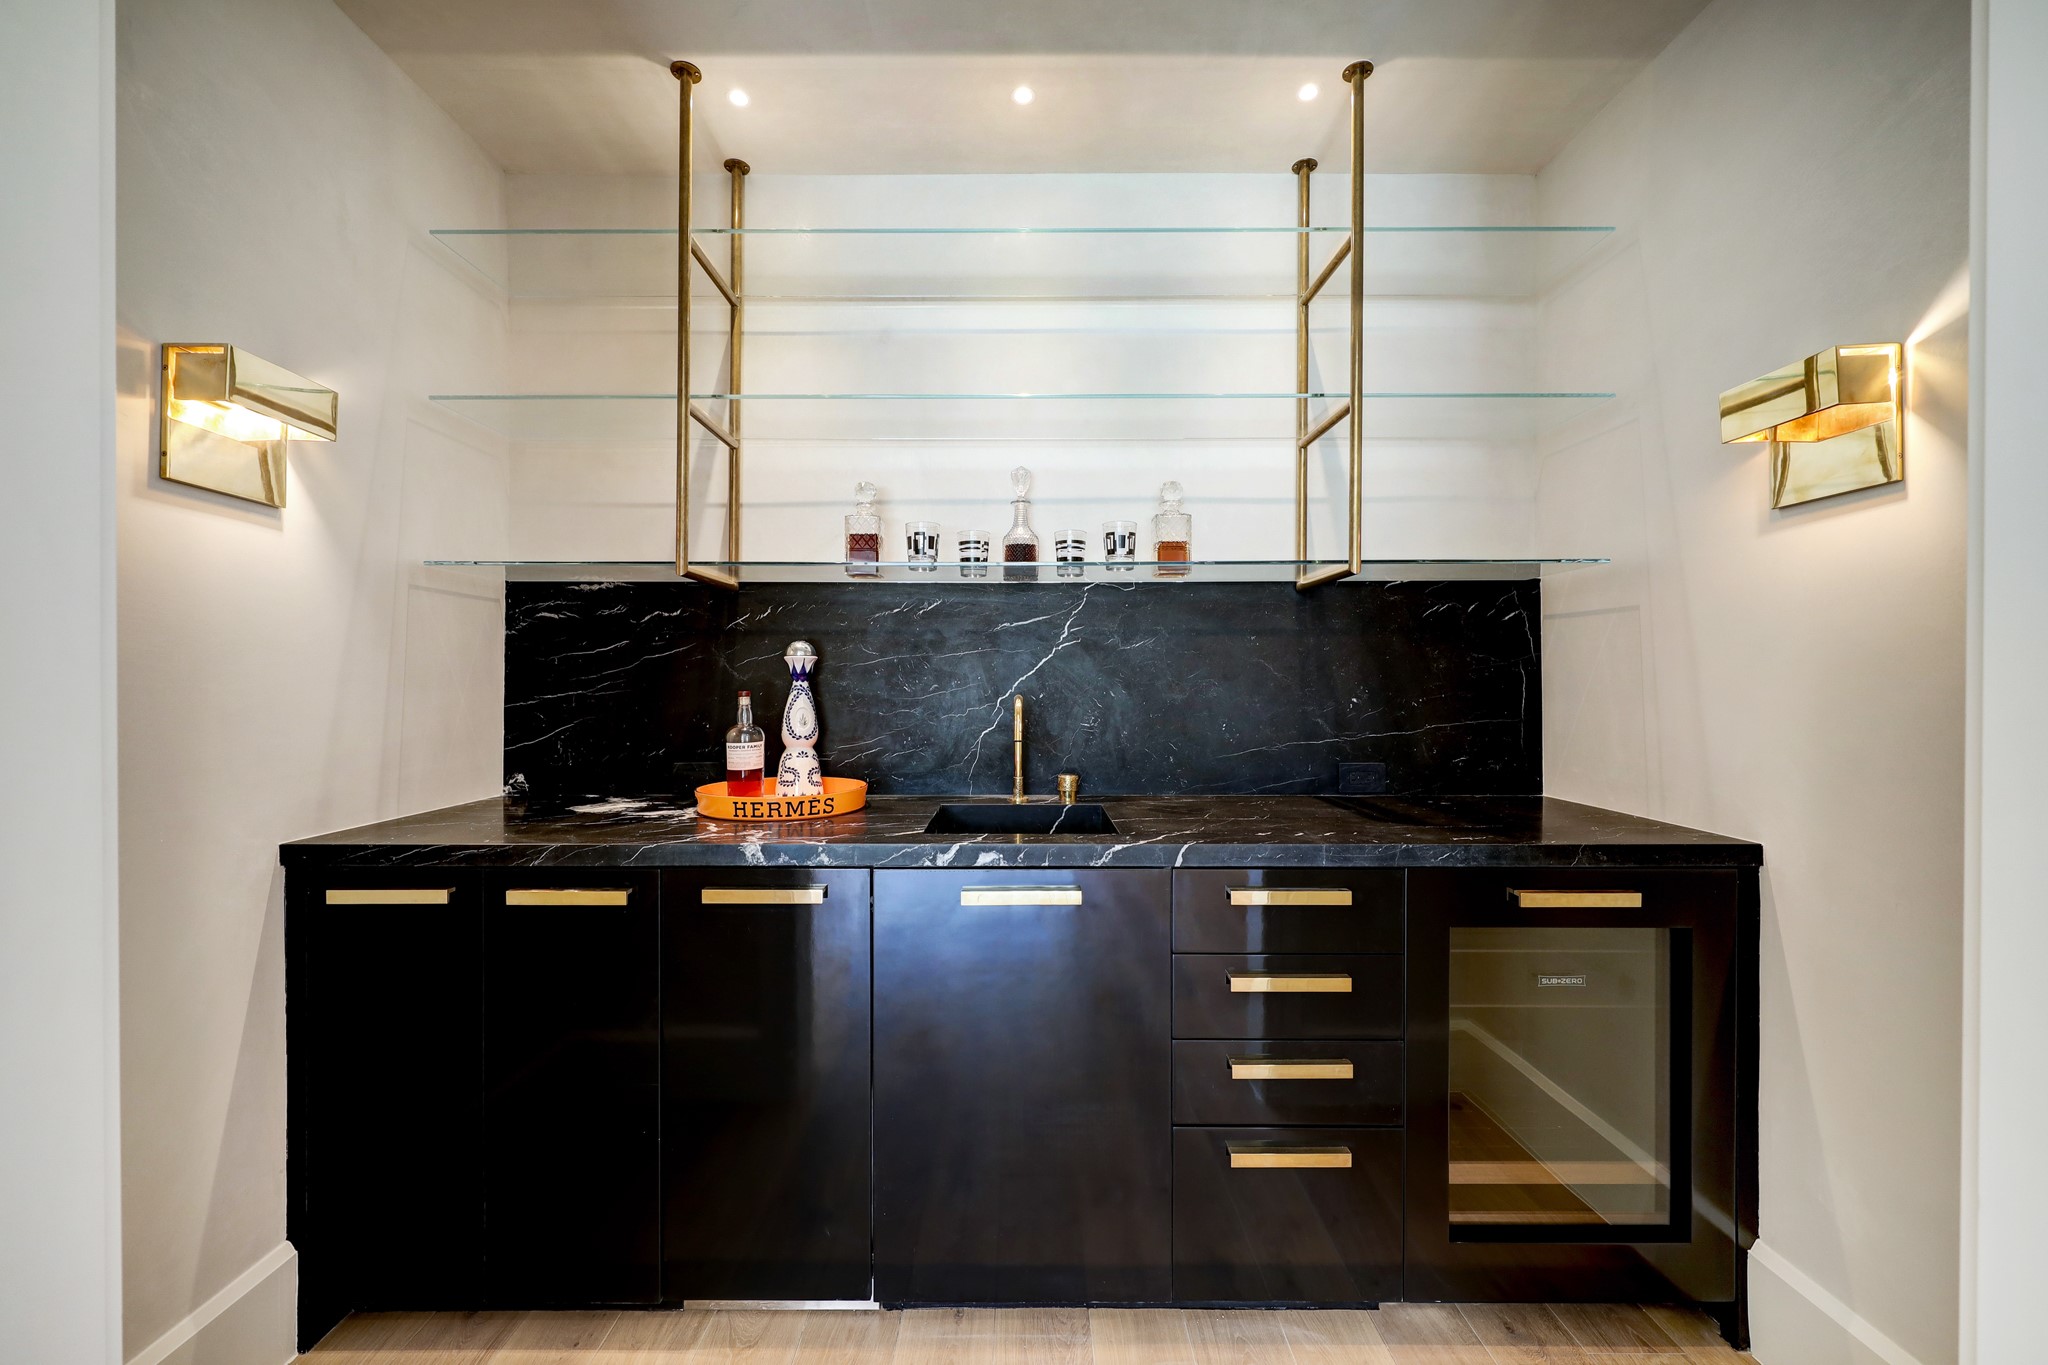 An intimate view of the wet bar, finished in high-gloss lacquered paint and adorned with unlacquered brass hardware. The sunken sink, crafted in marble, adds an elegant touch. The space is fully equipped with an under-mounted fridge, ample storage, and an ice maker.